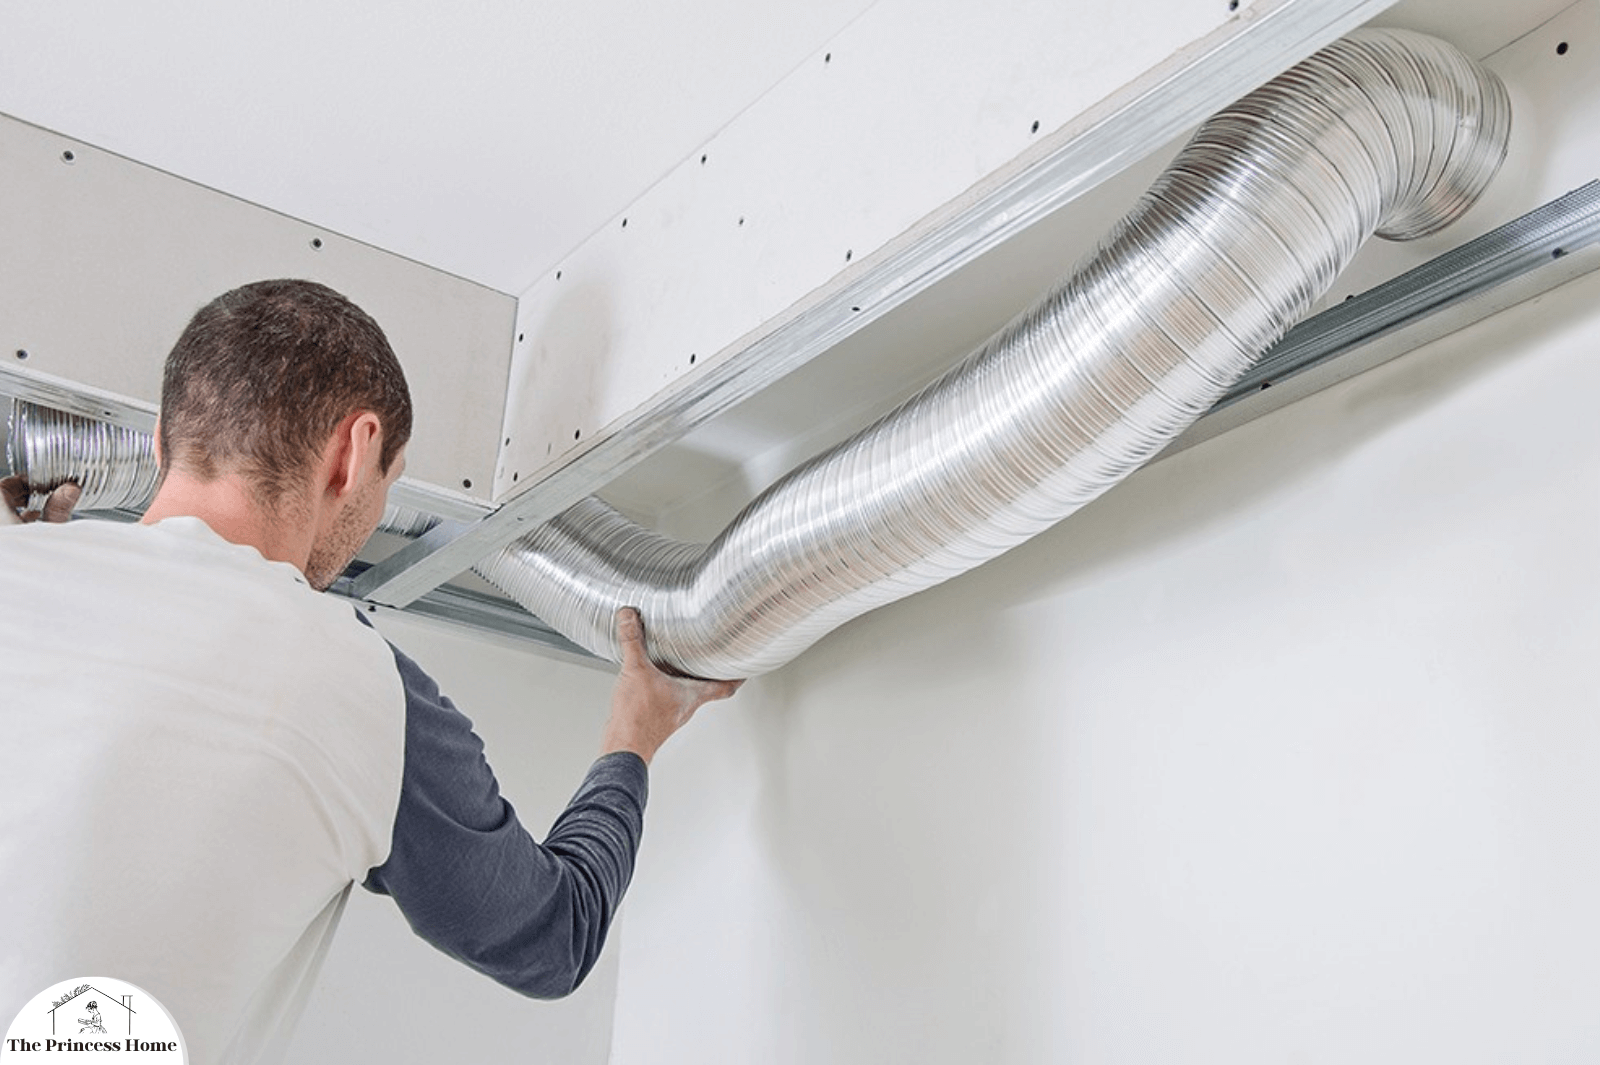 A. Seal and Insulate Ducts: